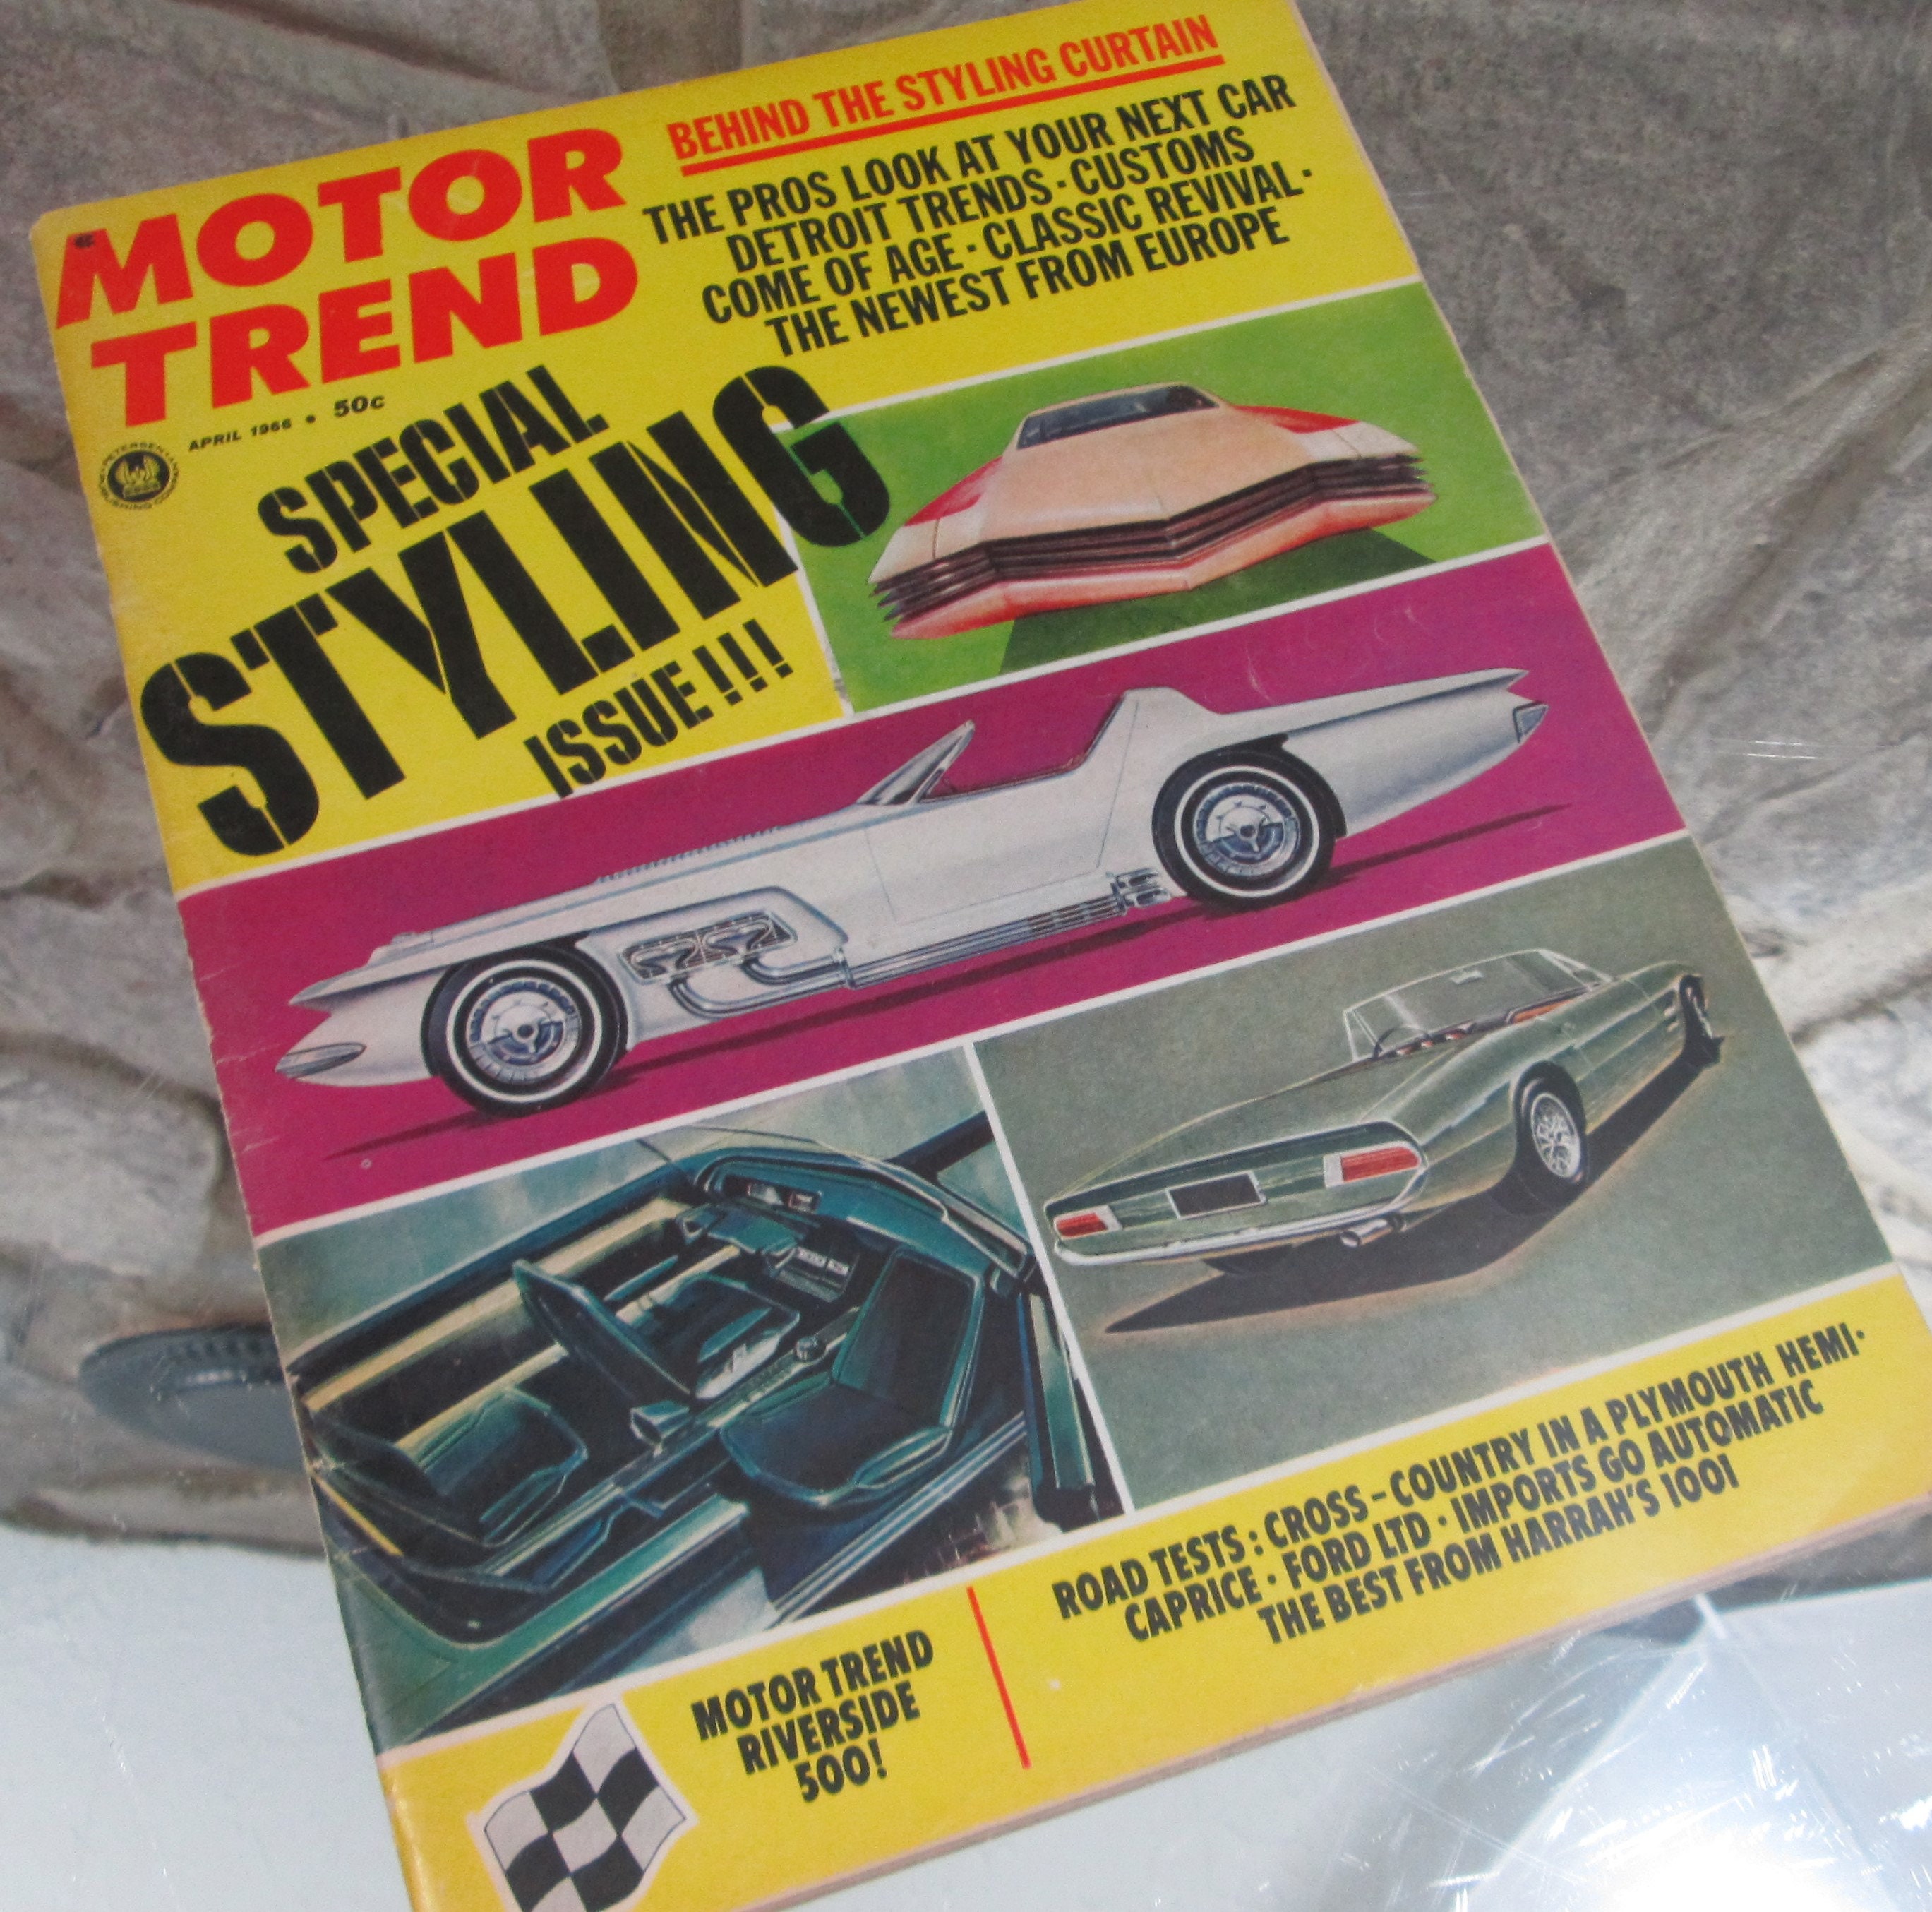 Vintage Motor Trend April 1966 Car Magazine, Special Styling Issue -  UK